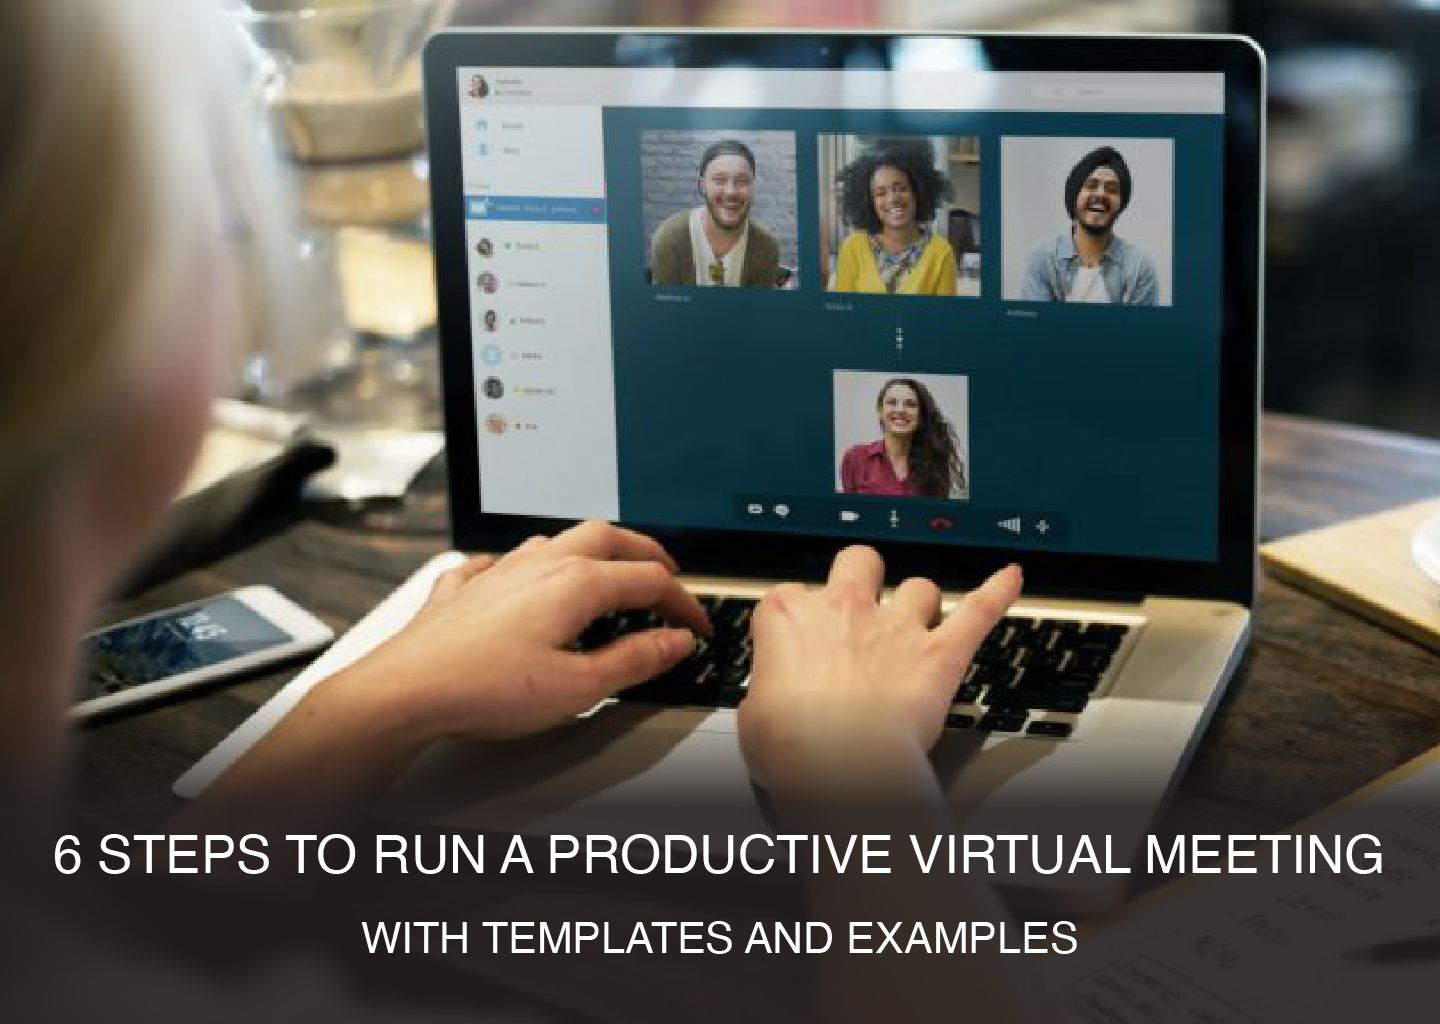 6 Steps to Run a Productive Virtual Meeting with Templates and Examples